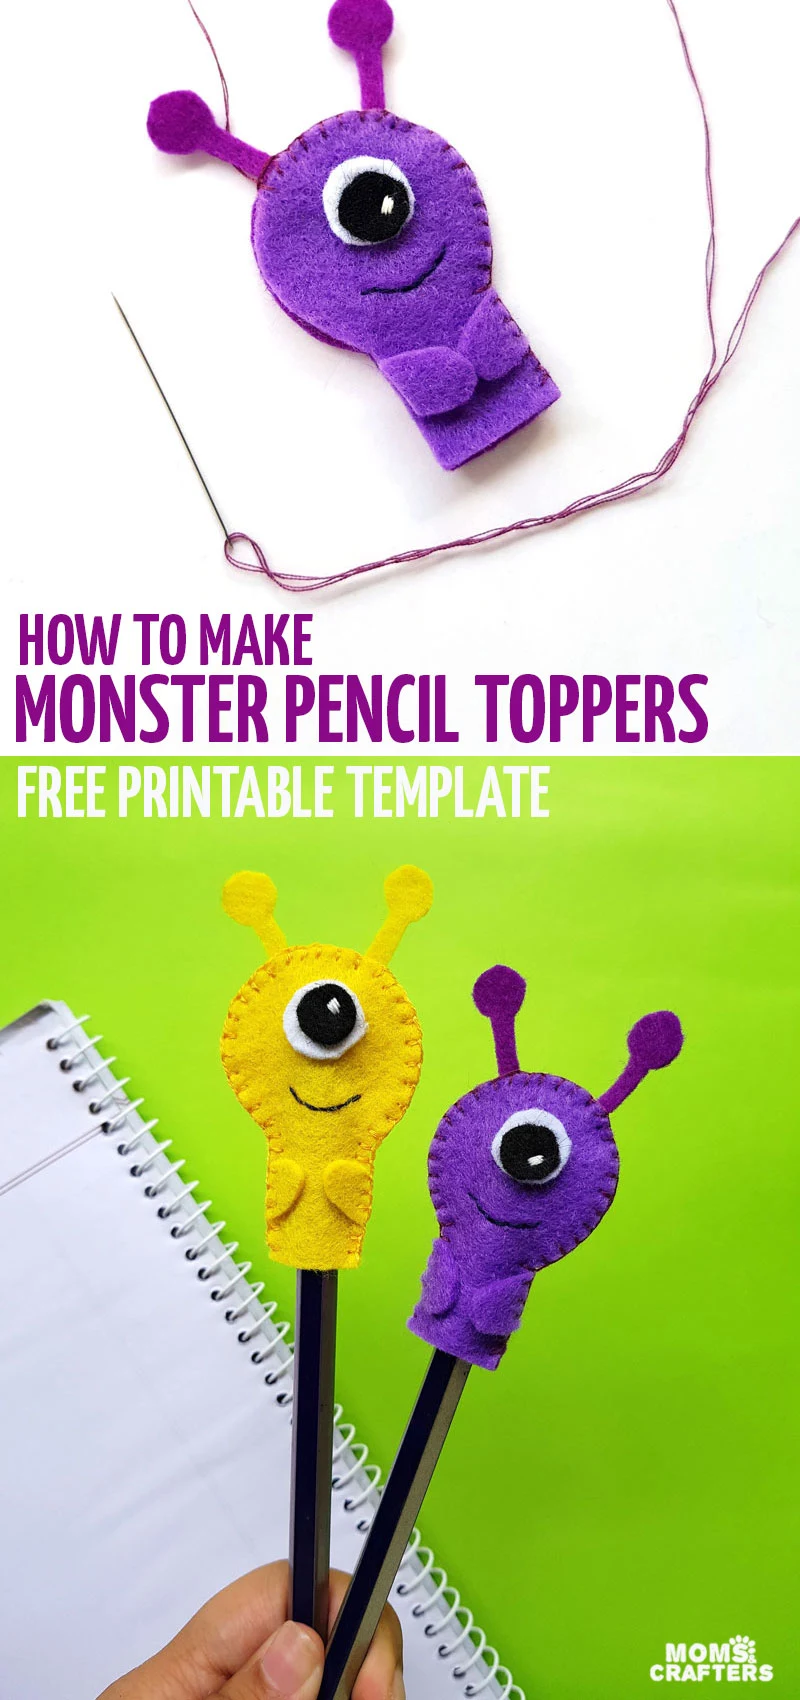 Click to download the free template to make this monster pencil toppers craft! This fun back to school craft idea is easy and perfect for kids and tweens who like to make DIY school supplies. 